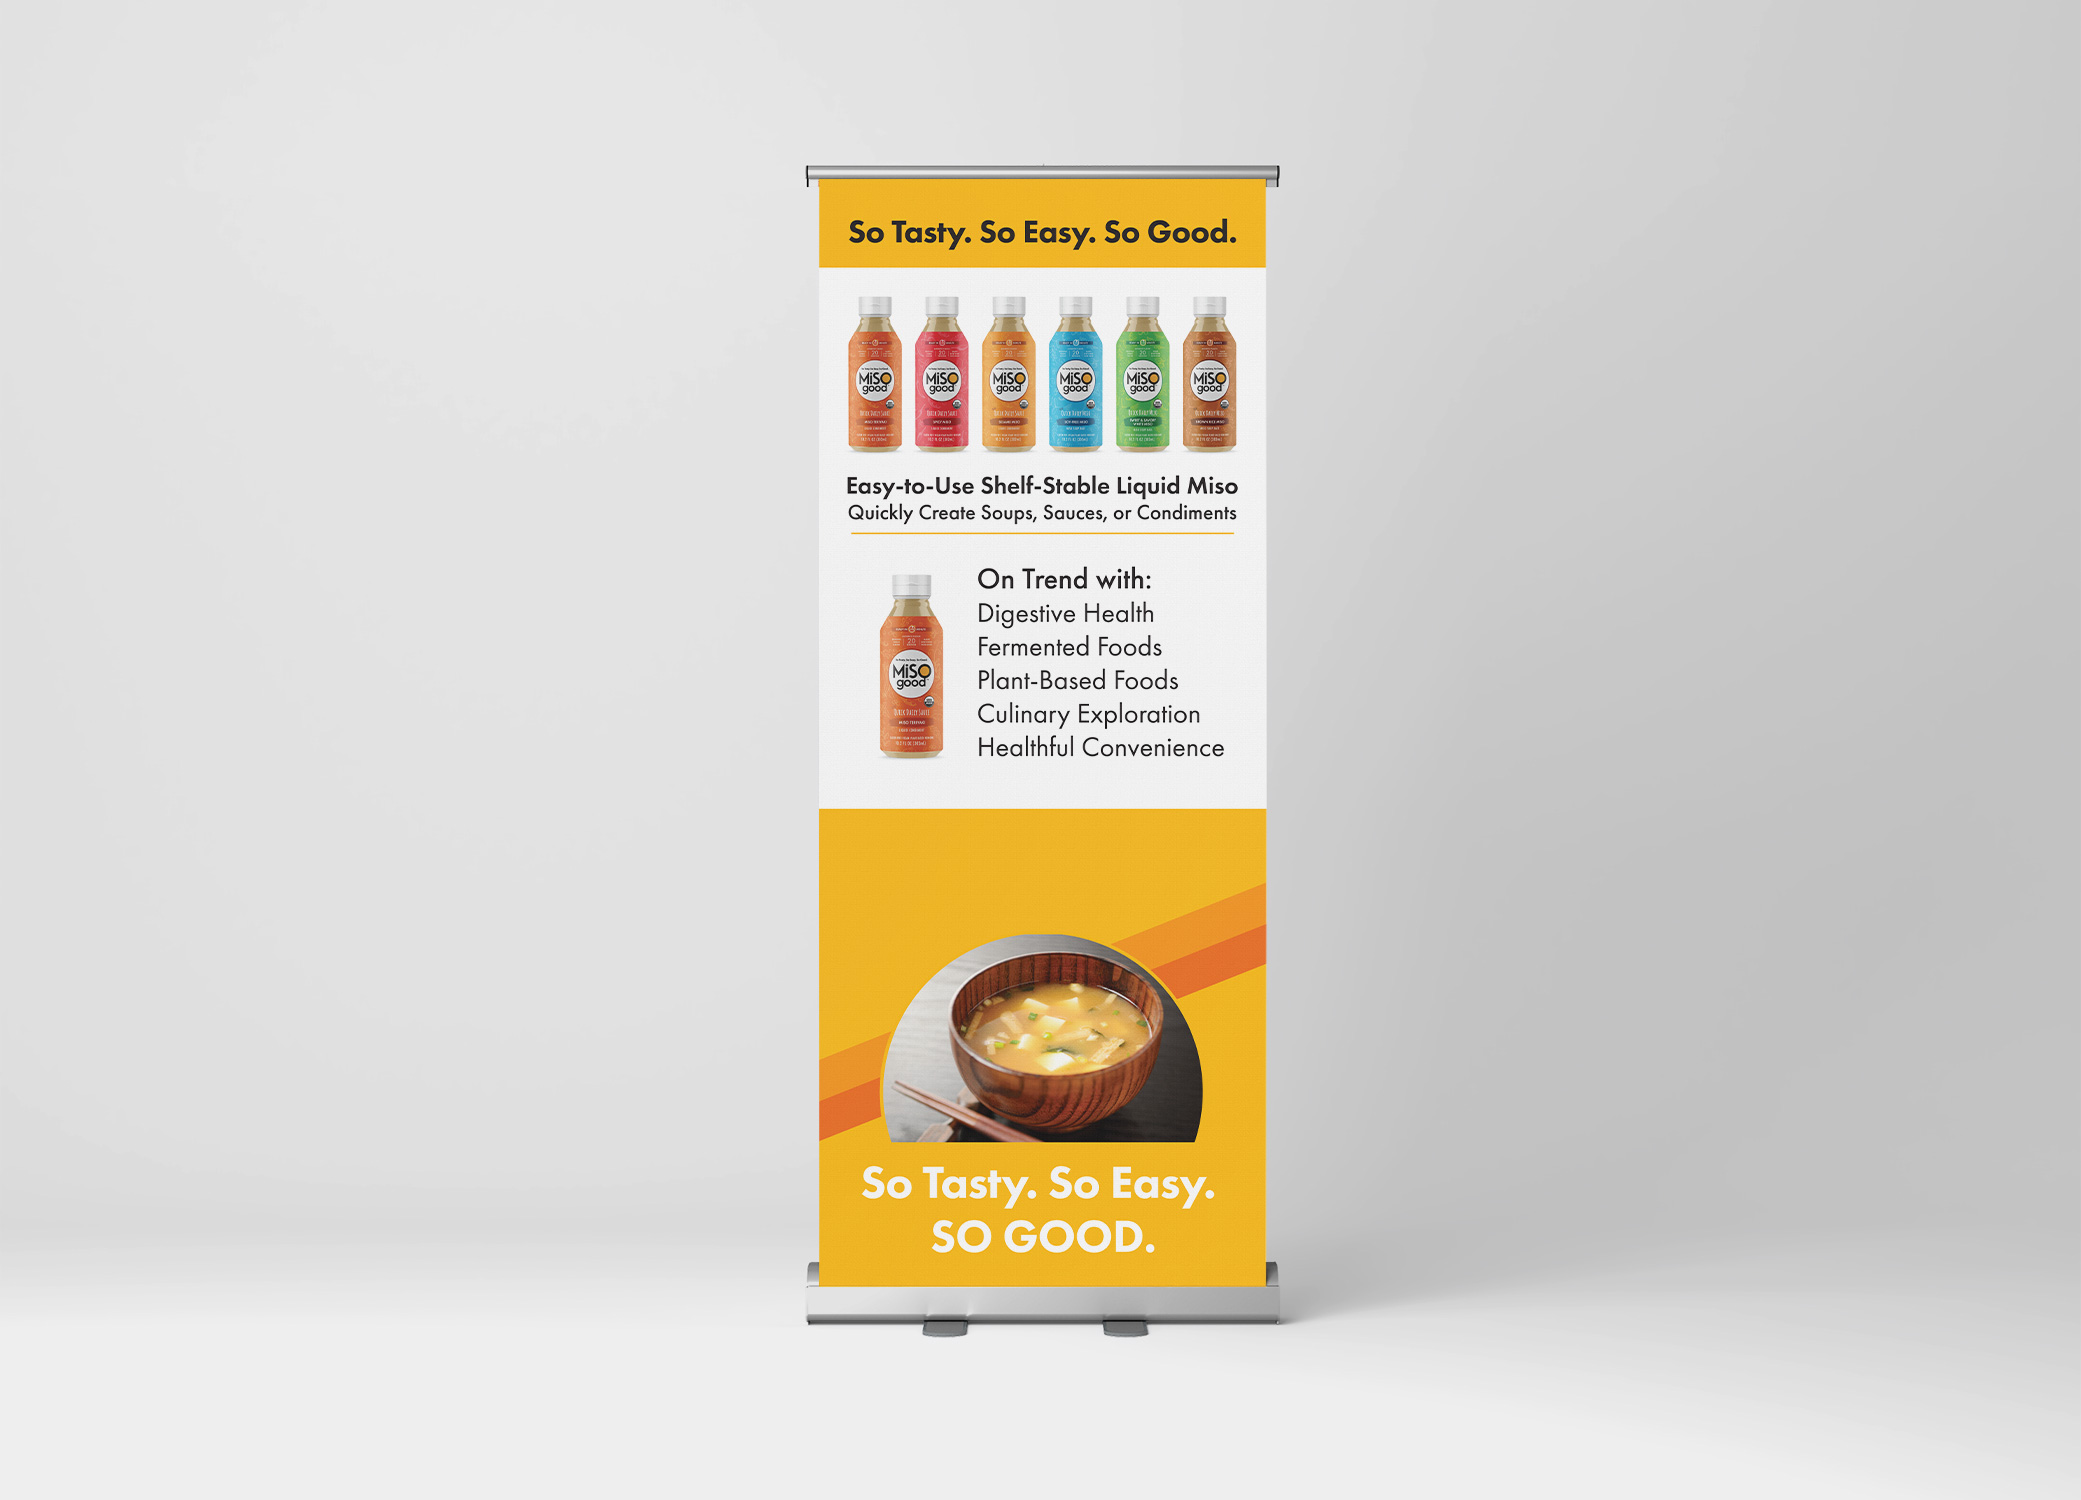 MiSOgood colorful banner design showing graphic design for food packaging and selling points of the product.